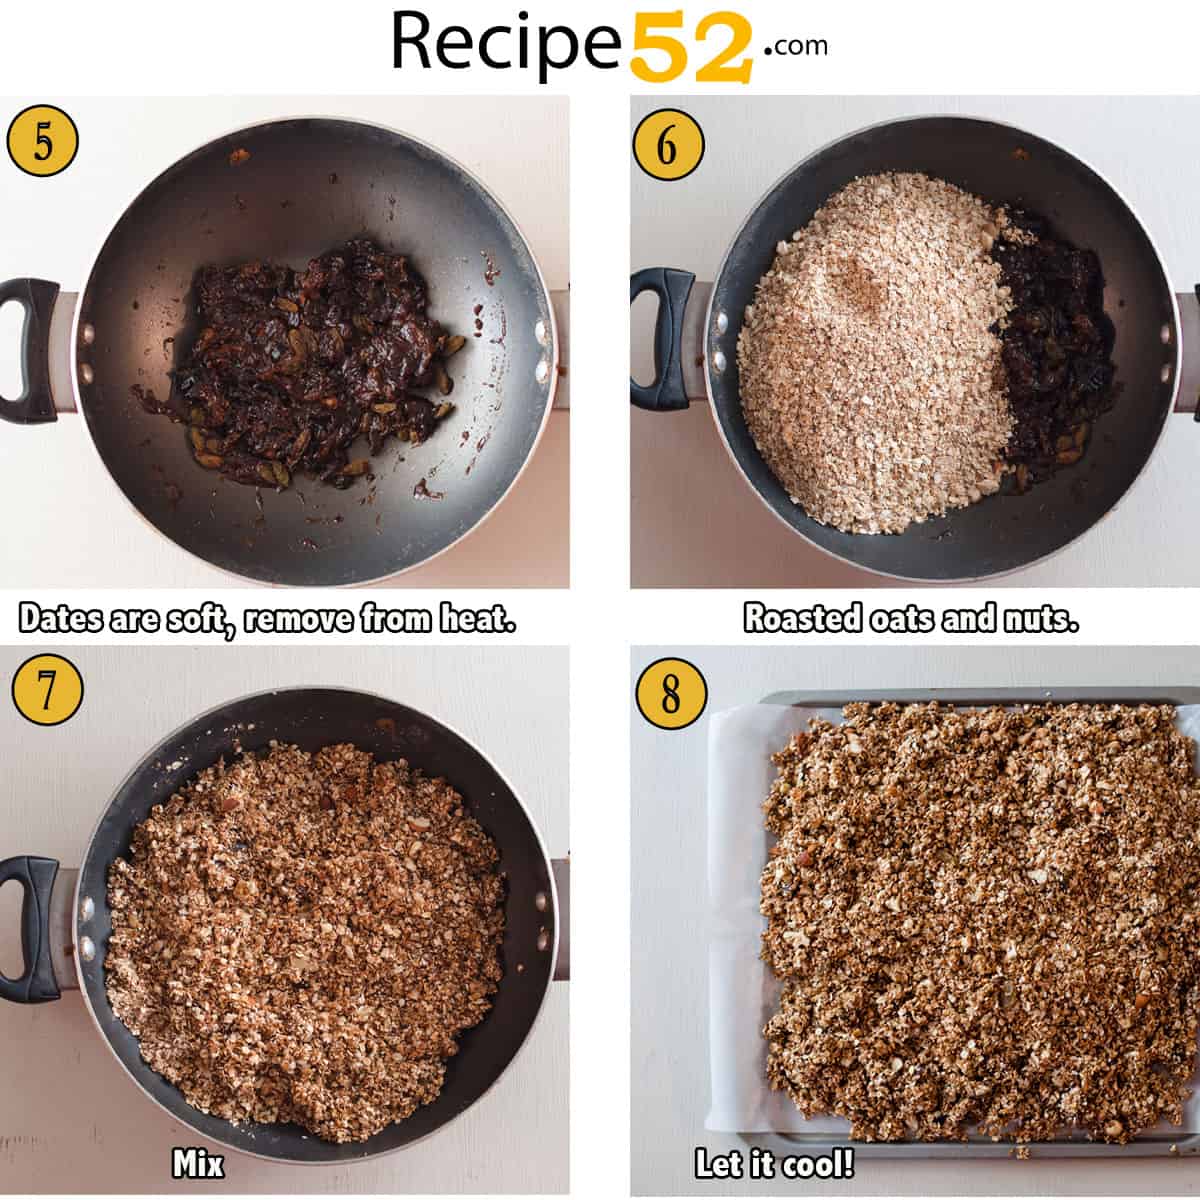 Steps to combine quick oats and brown sugar and date syrup to assemble granola.